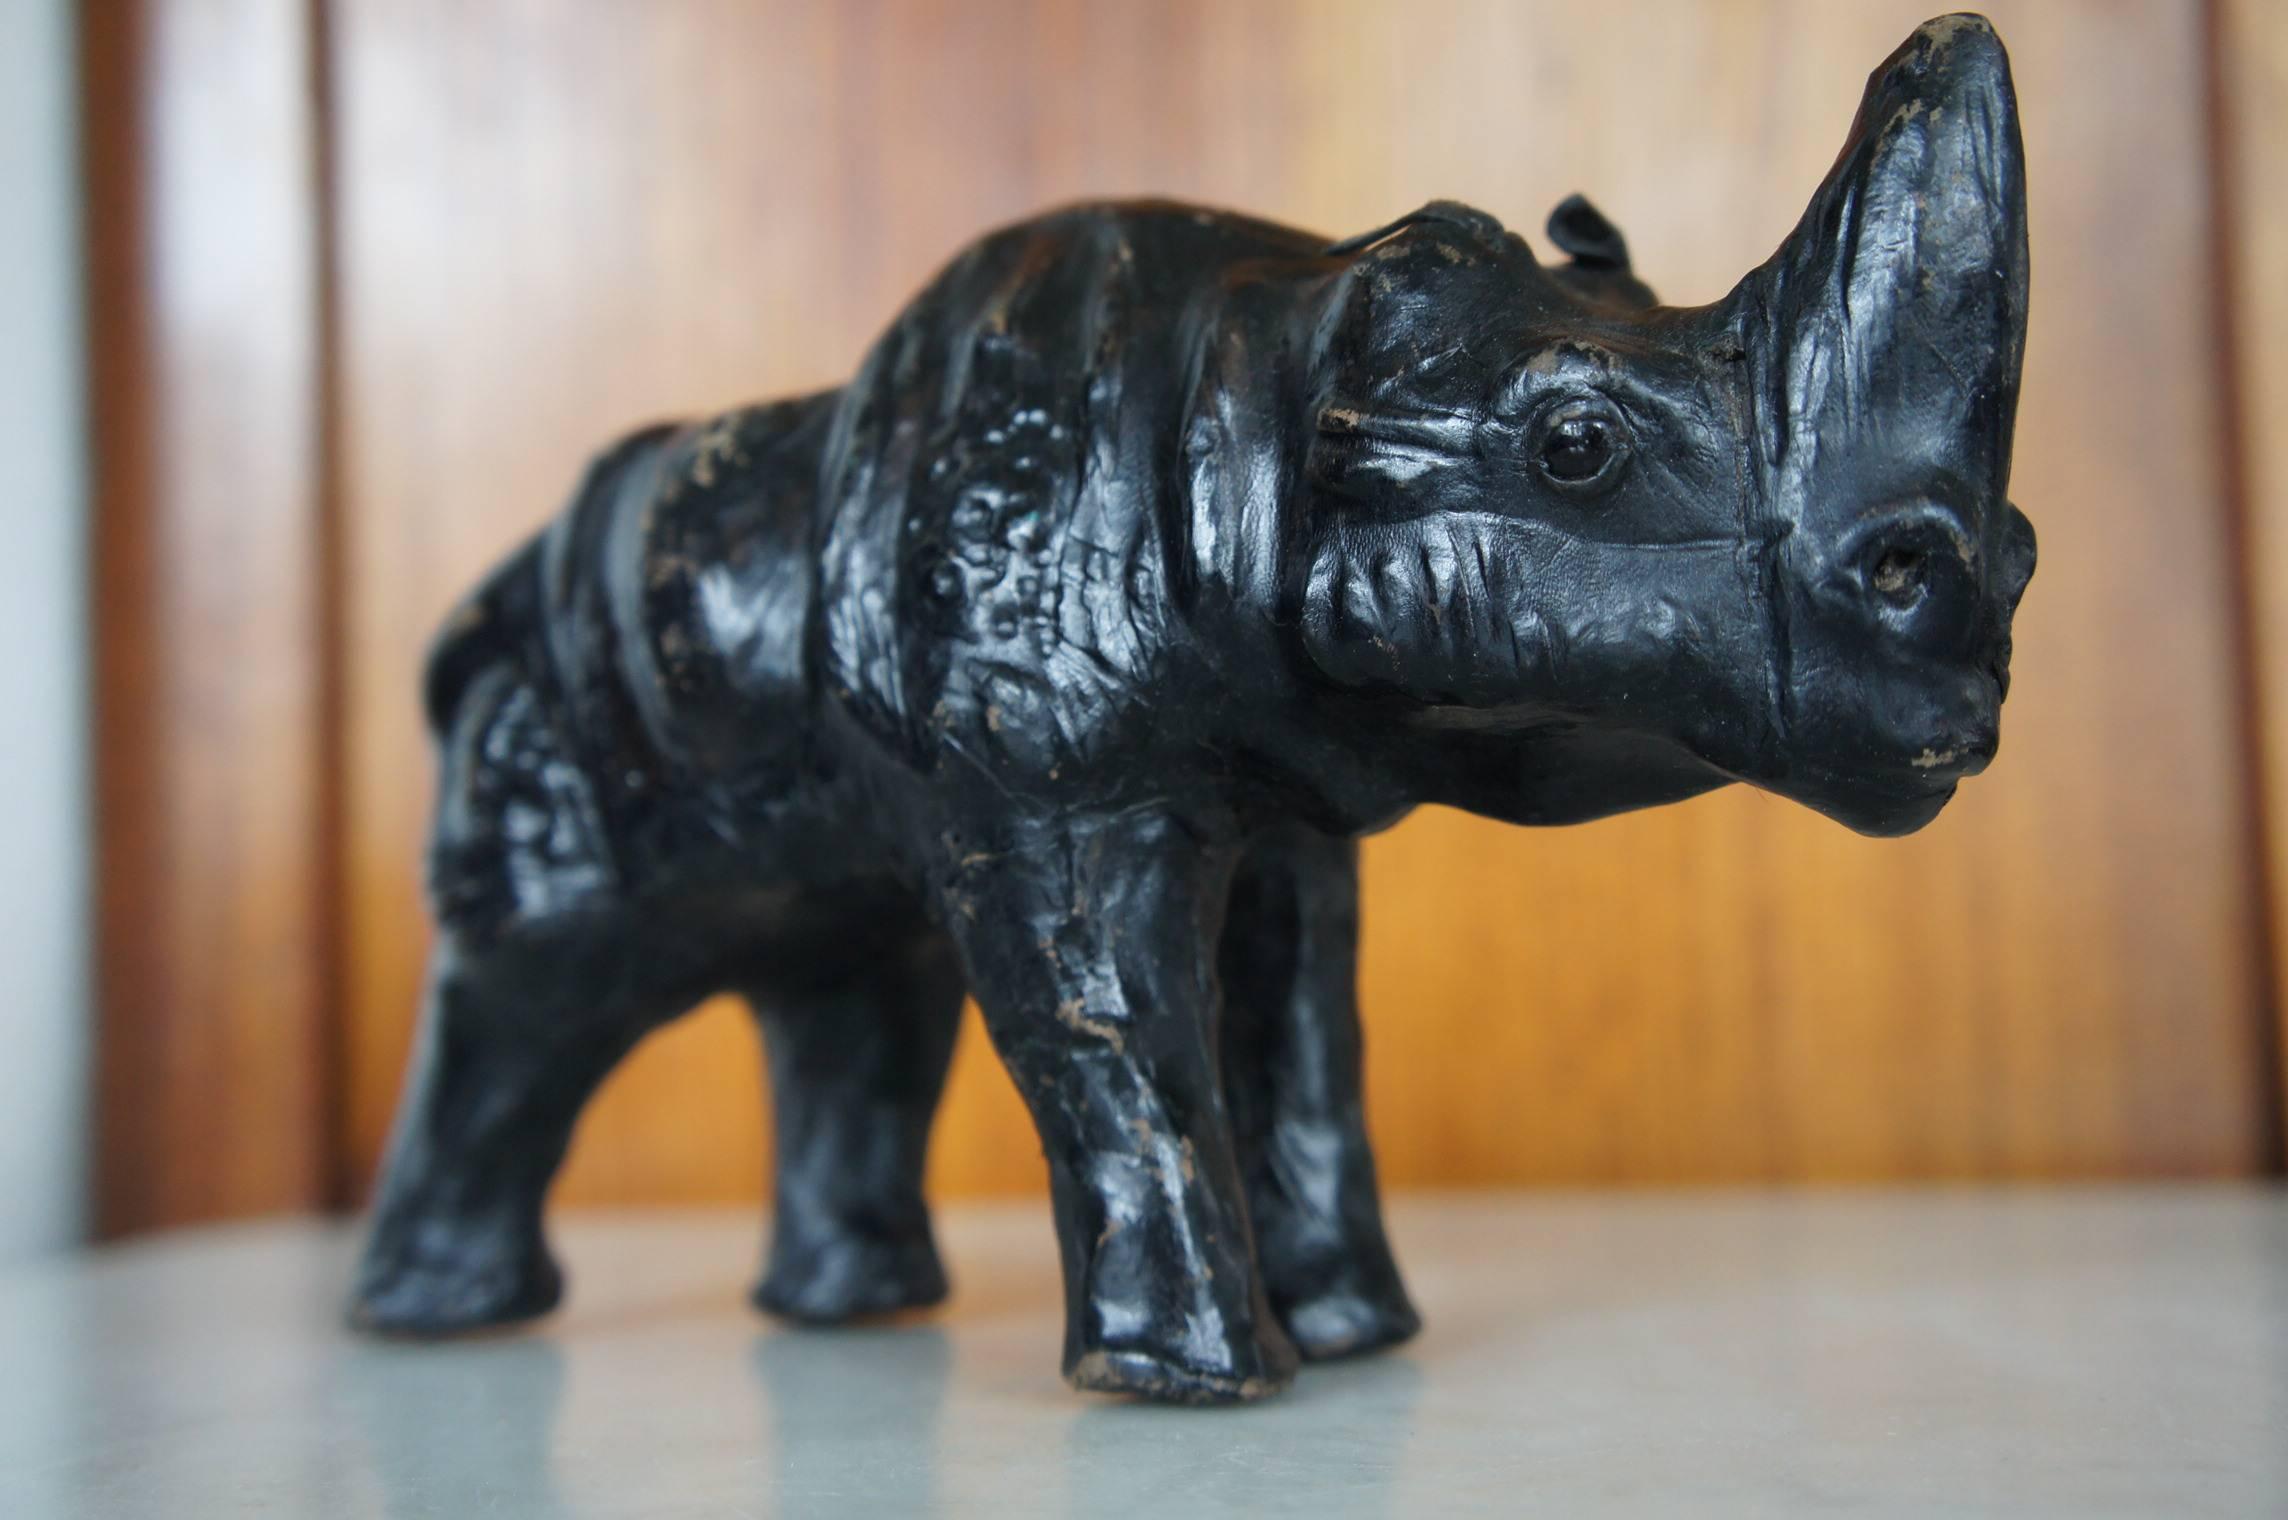 Midcentury pair of handcrafted black rhinos.

These 20th century wooden rhino sculptures with black leather skin are a rare pair. They are small in size and they both have beautiful and dark, glass eyes. These original black leather ones are a joy